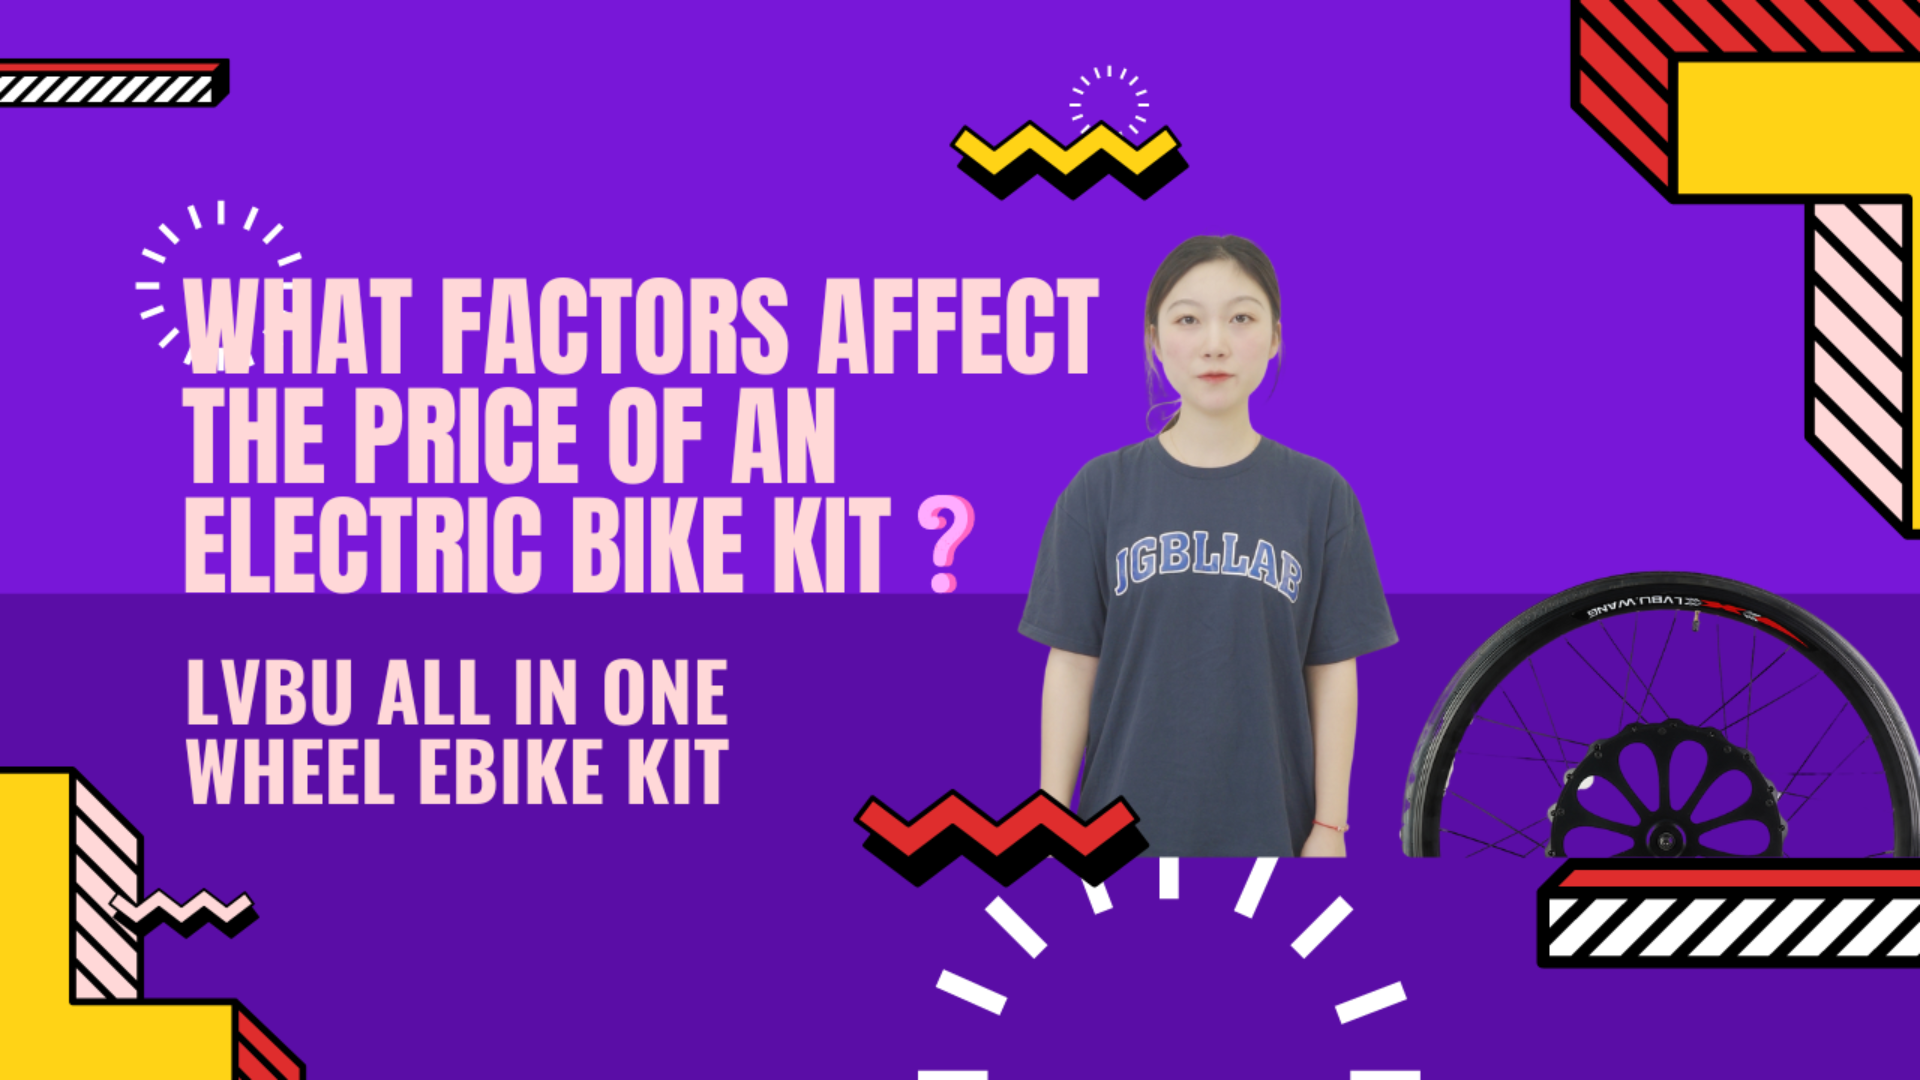 ALL-IN-ONE Ebike kit ‖ What factors affect the price of an electric bike kit?